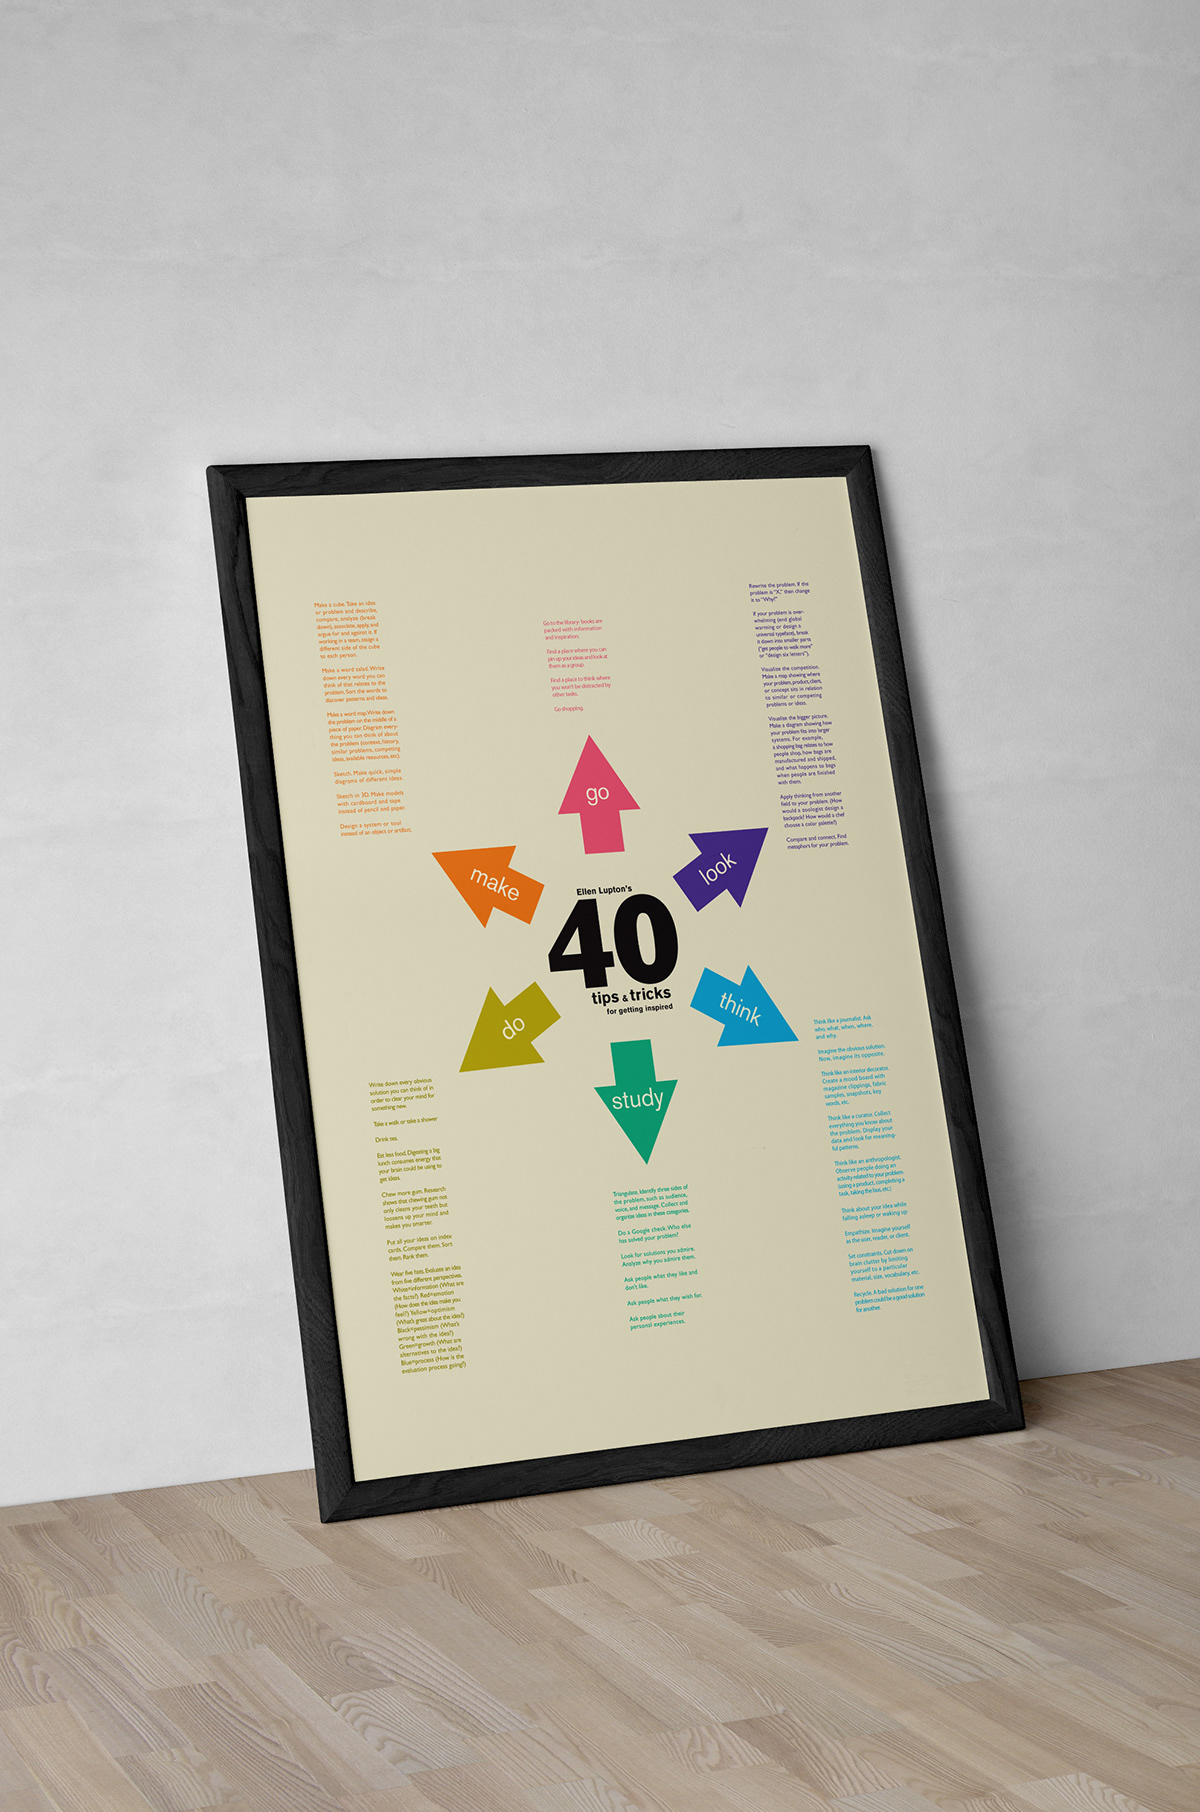 ellen lupton 40 tips and tricks poster swiss Style